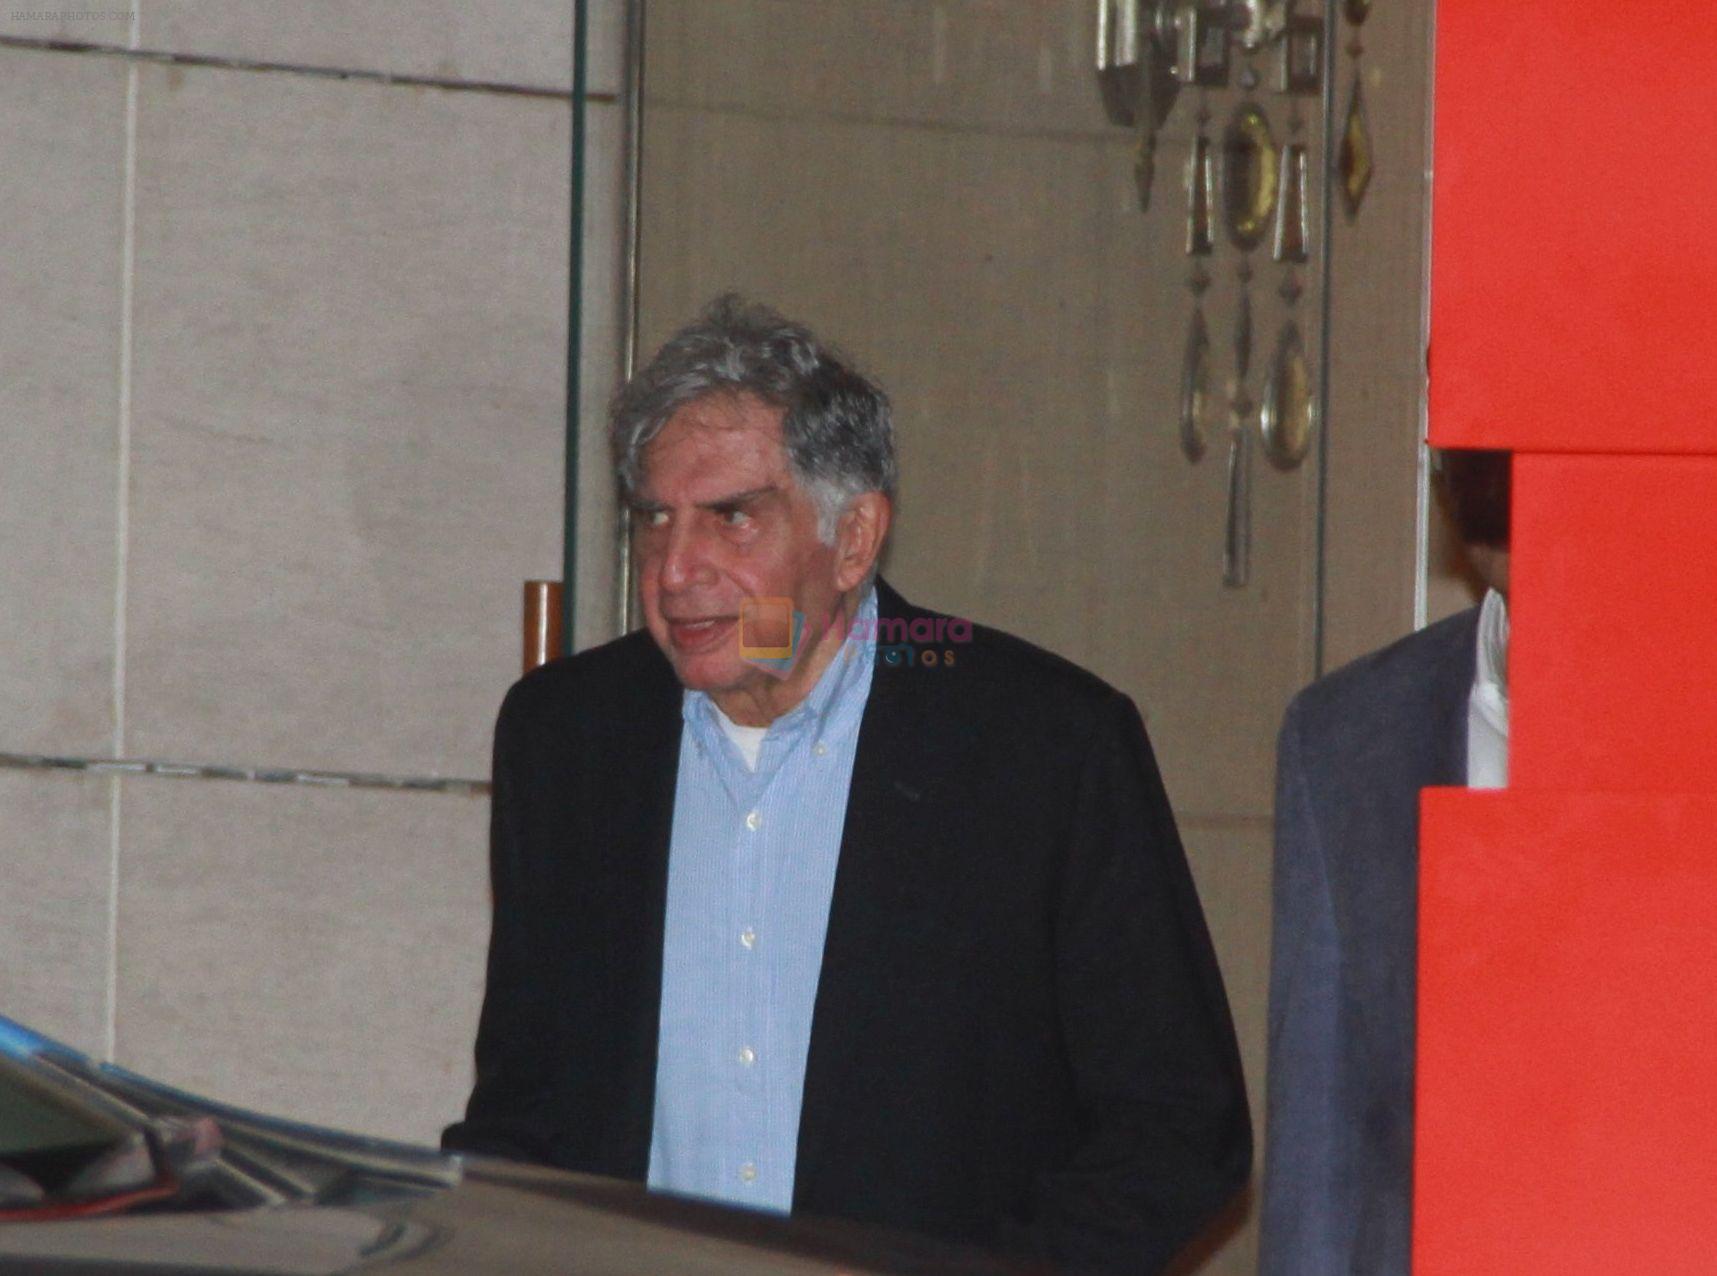 Ratan Tata at Dinner hosted in honour of Dr Thomas Boch the president of international Olympic Committee by Ambani's at Antilia in mumbai on 19th April 2018